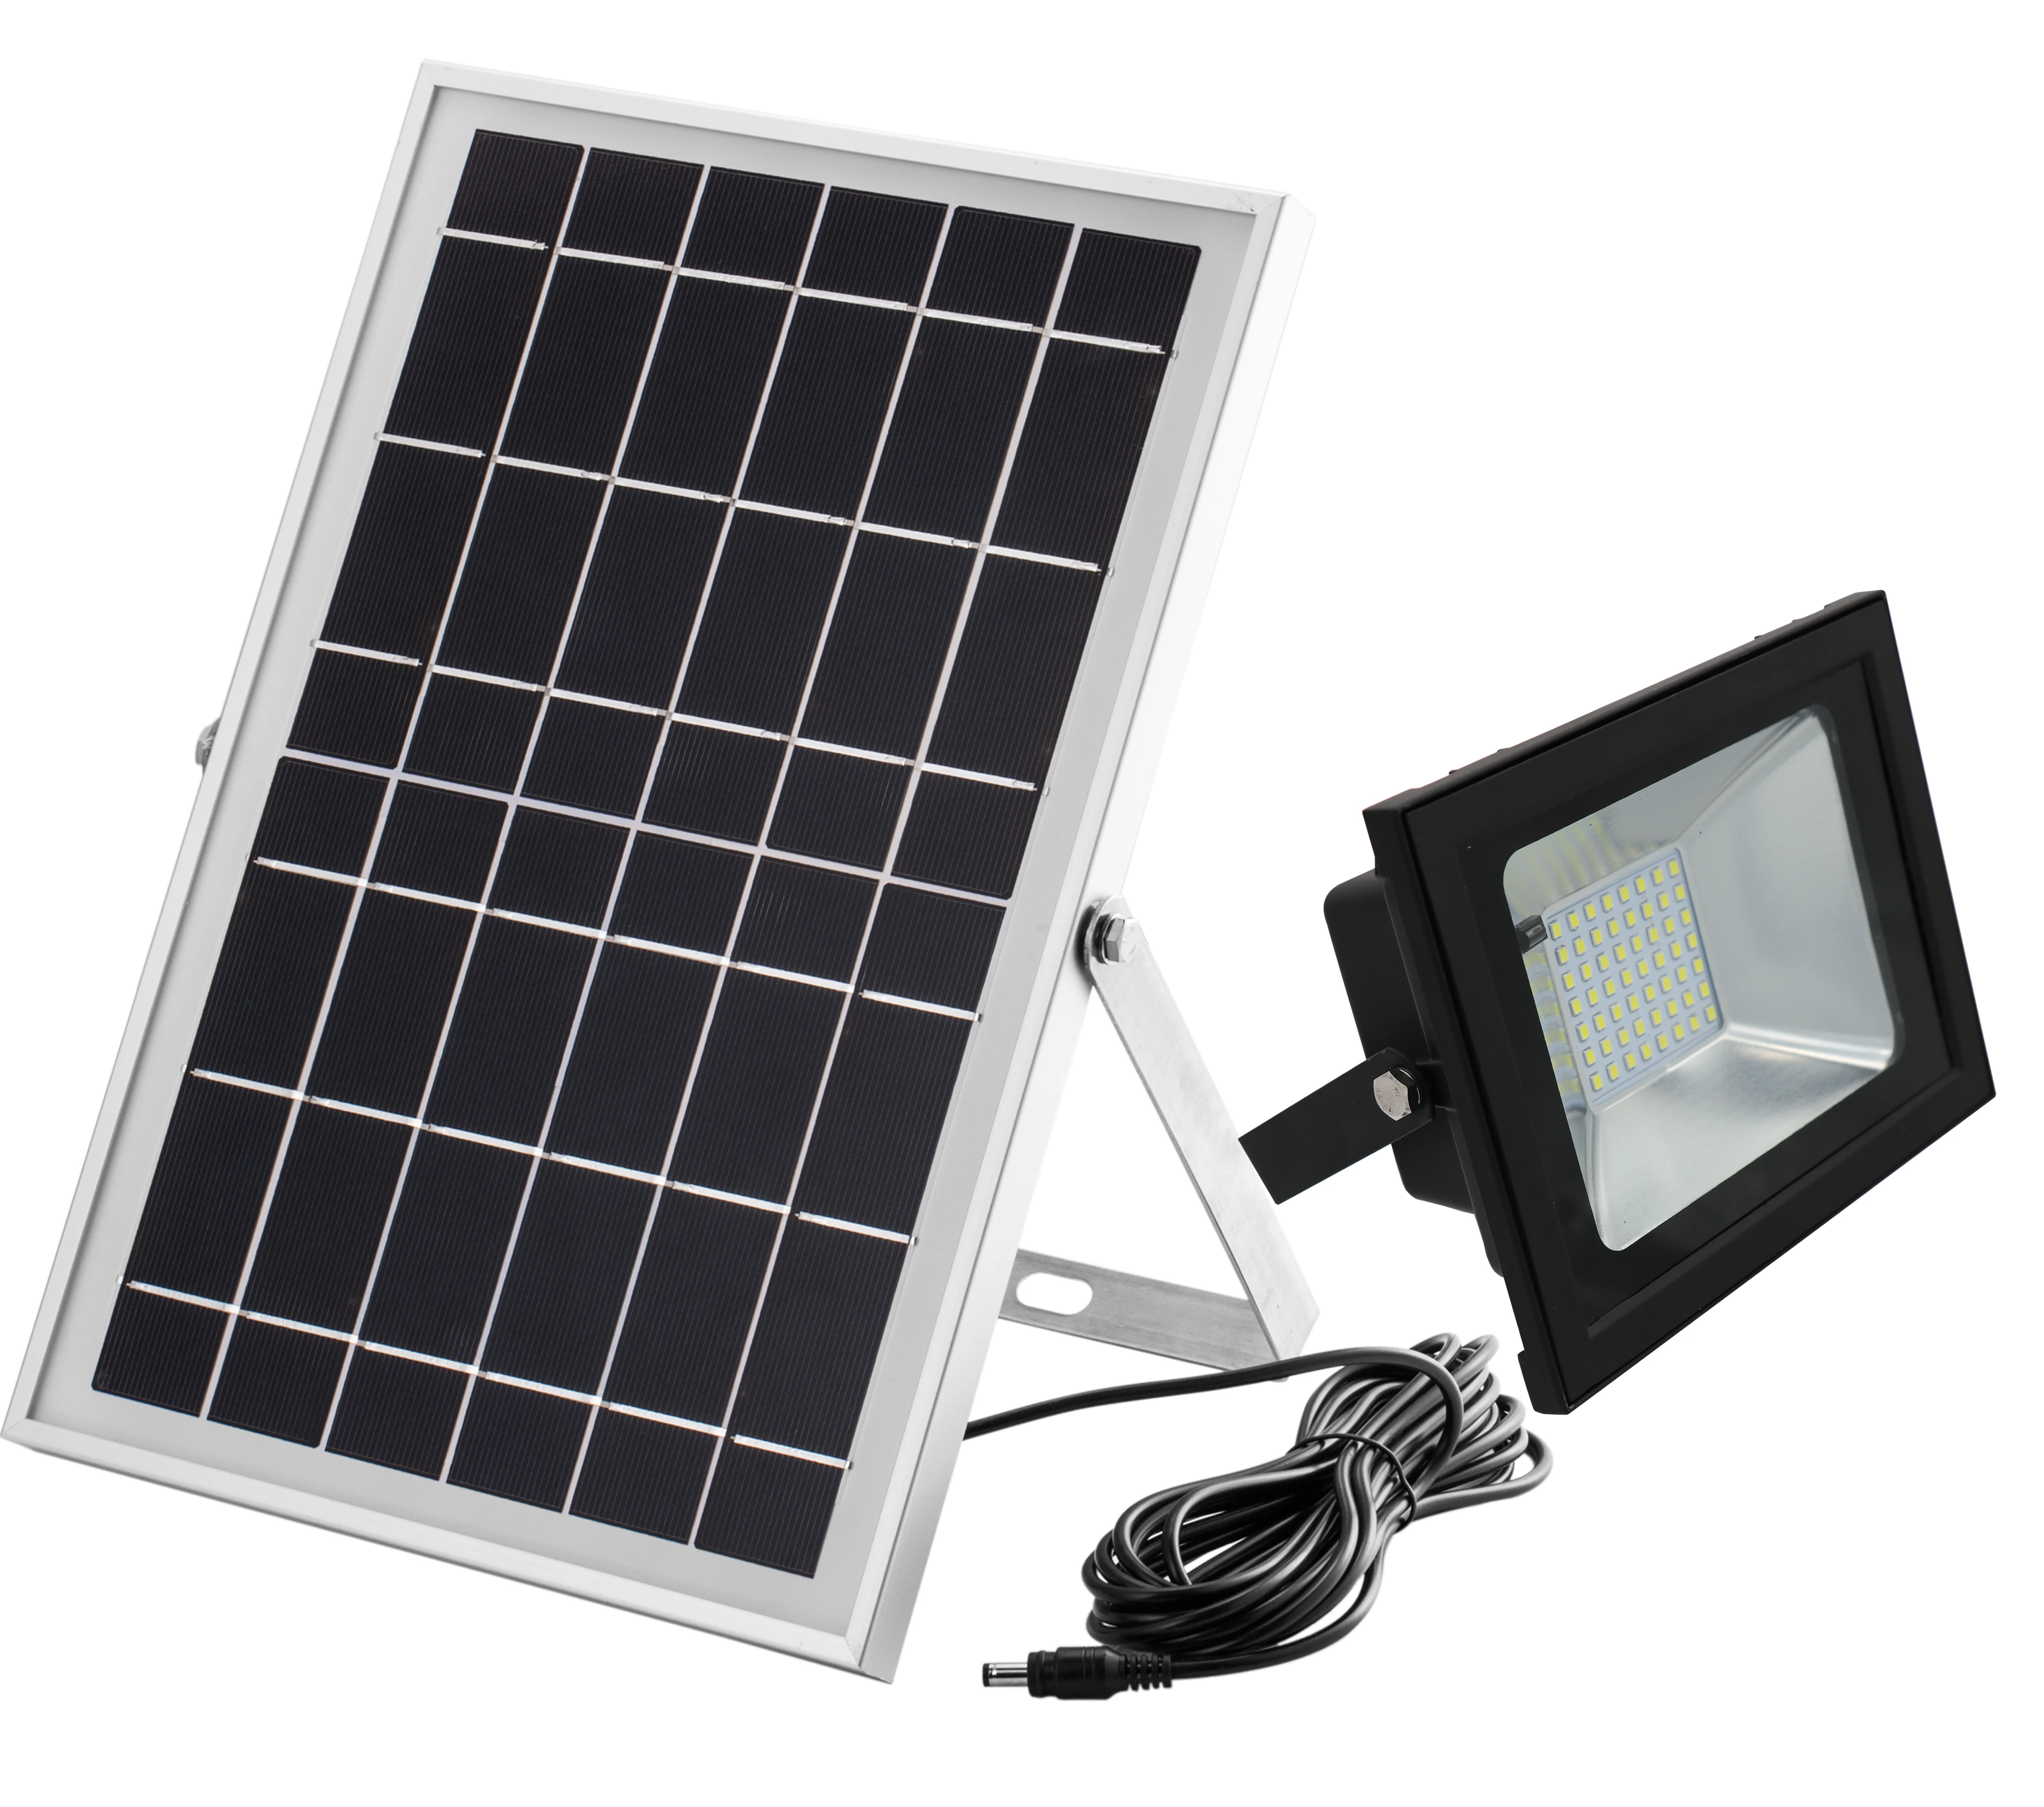 High quality 30w Nuusolar solar power battery operated wall sconces wall light outdoor led